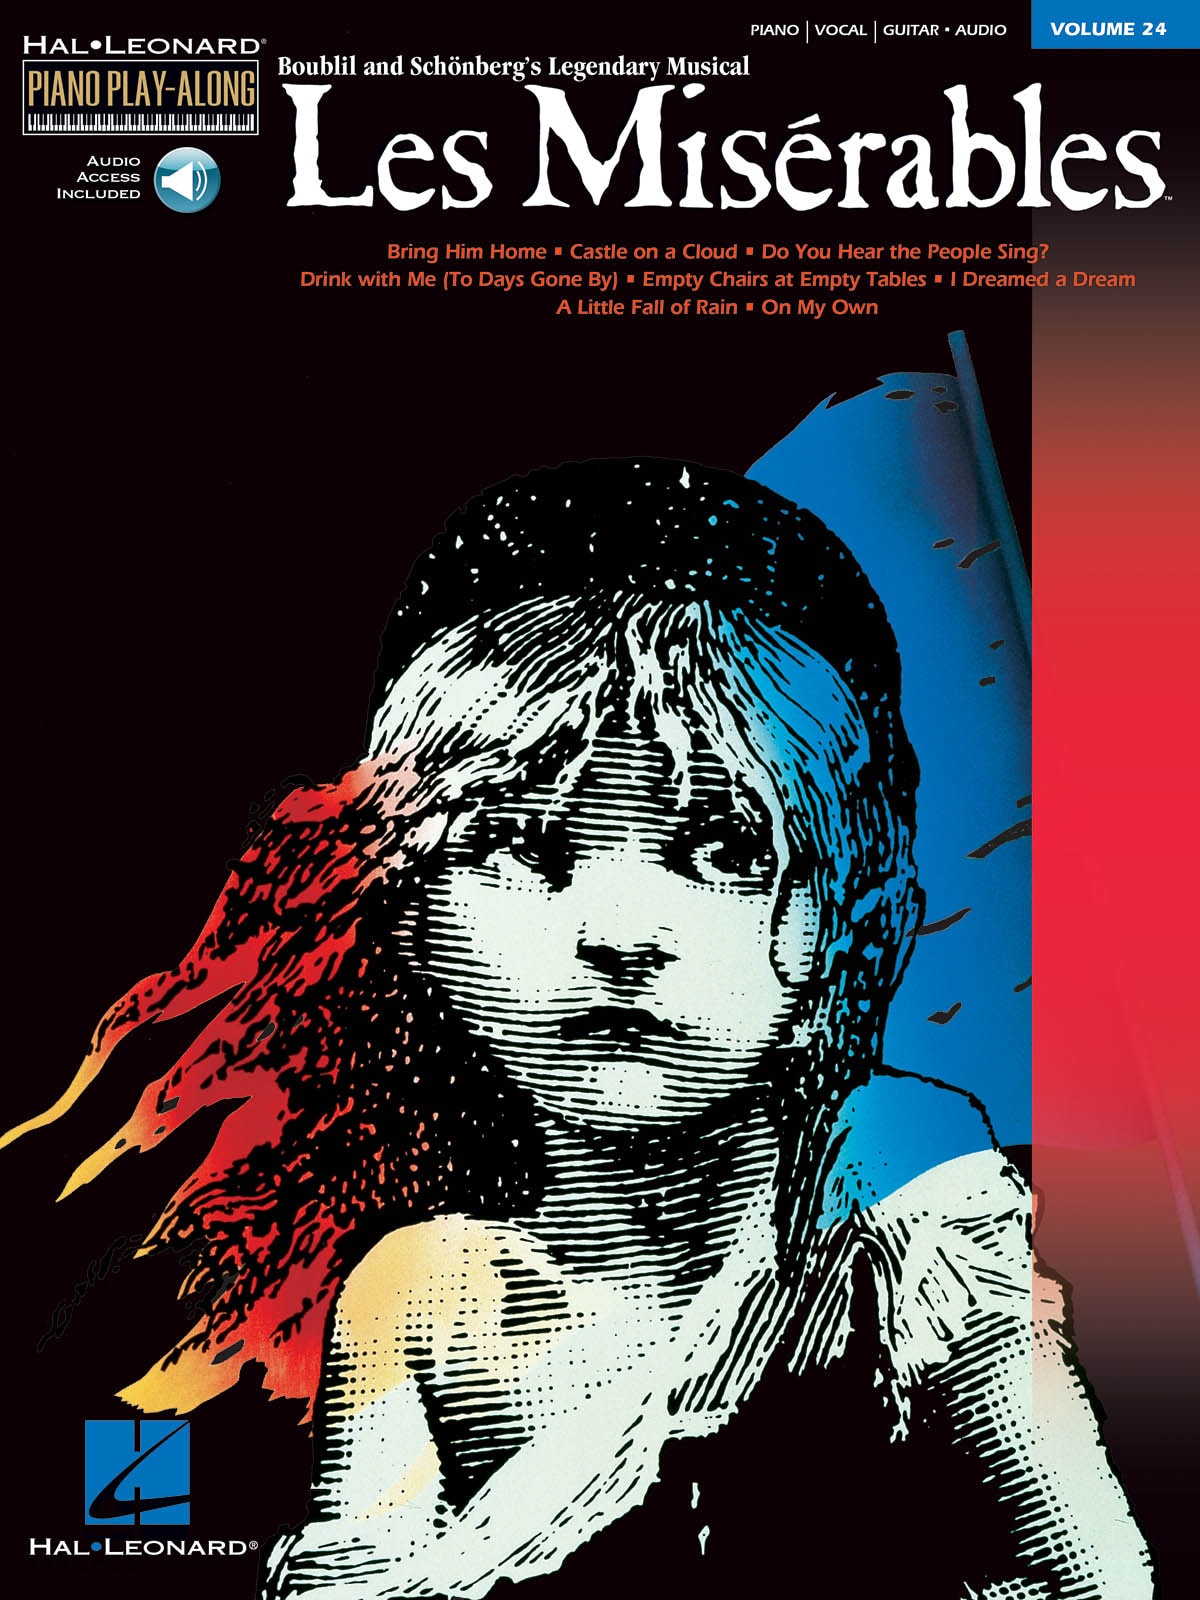 Piano Play-Along Volume 24: Les Miserables published by Hal Leonard (Book/Online Audio)